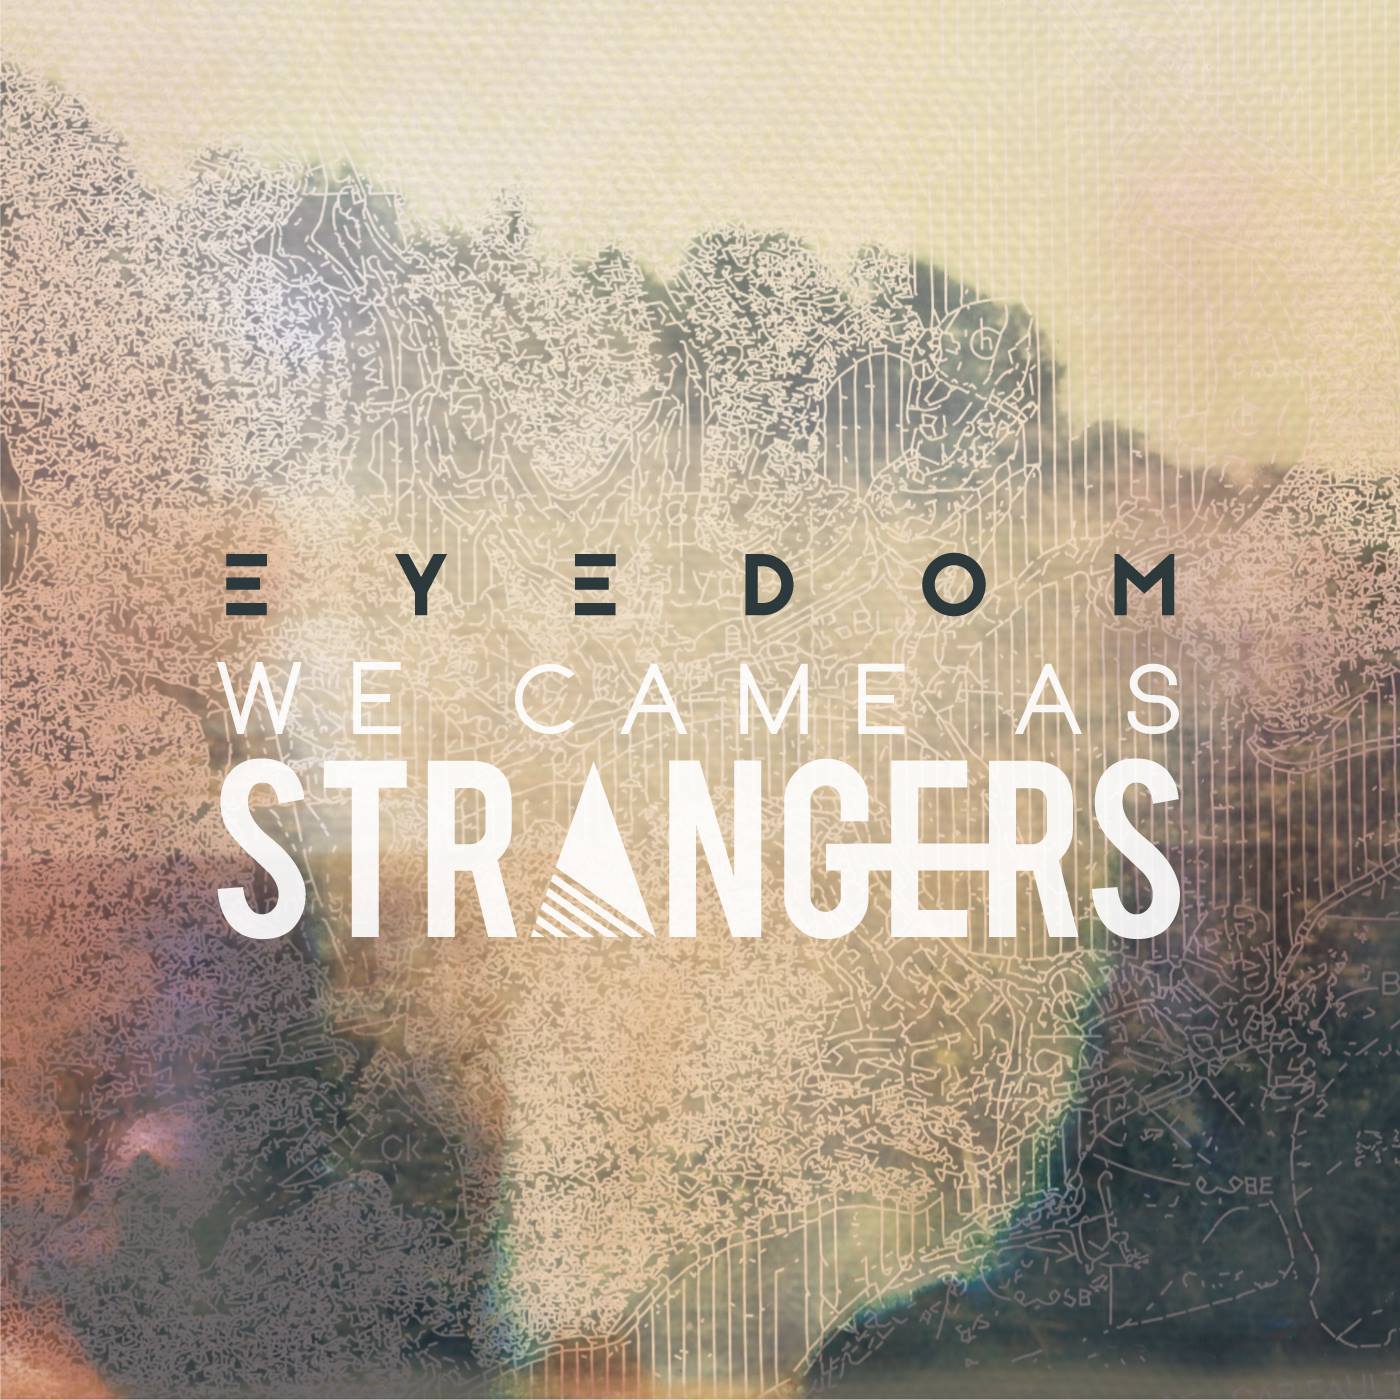 We Came As Strangers announce third album release